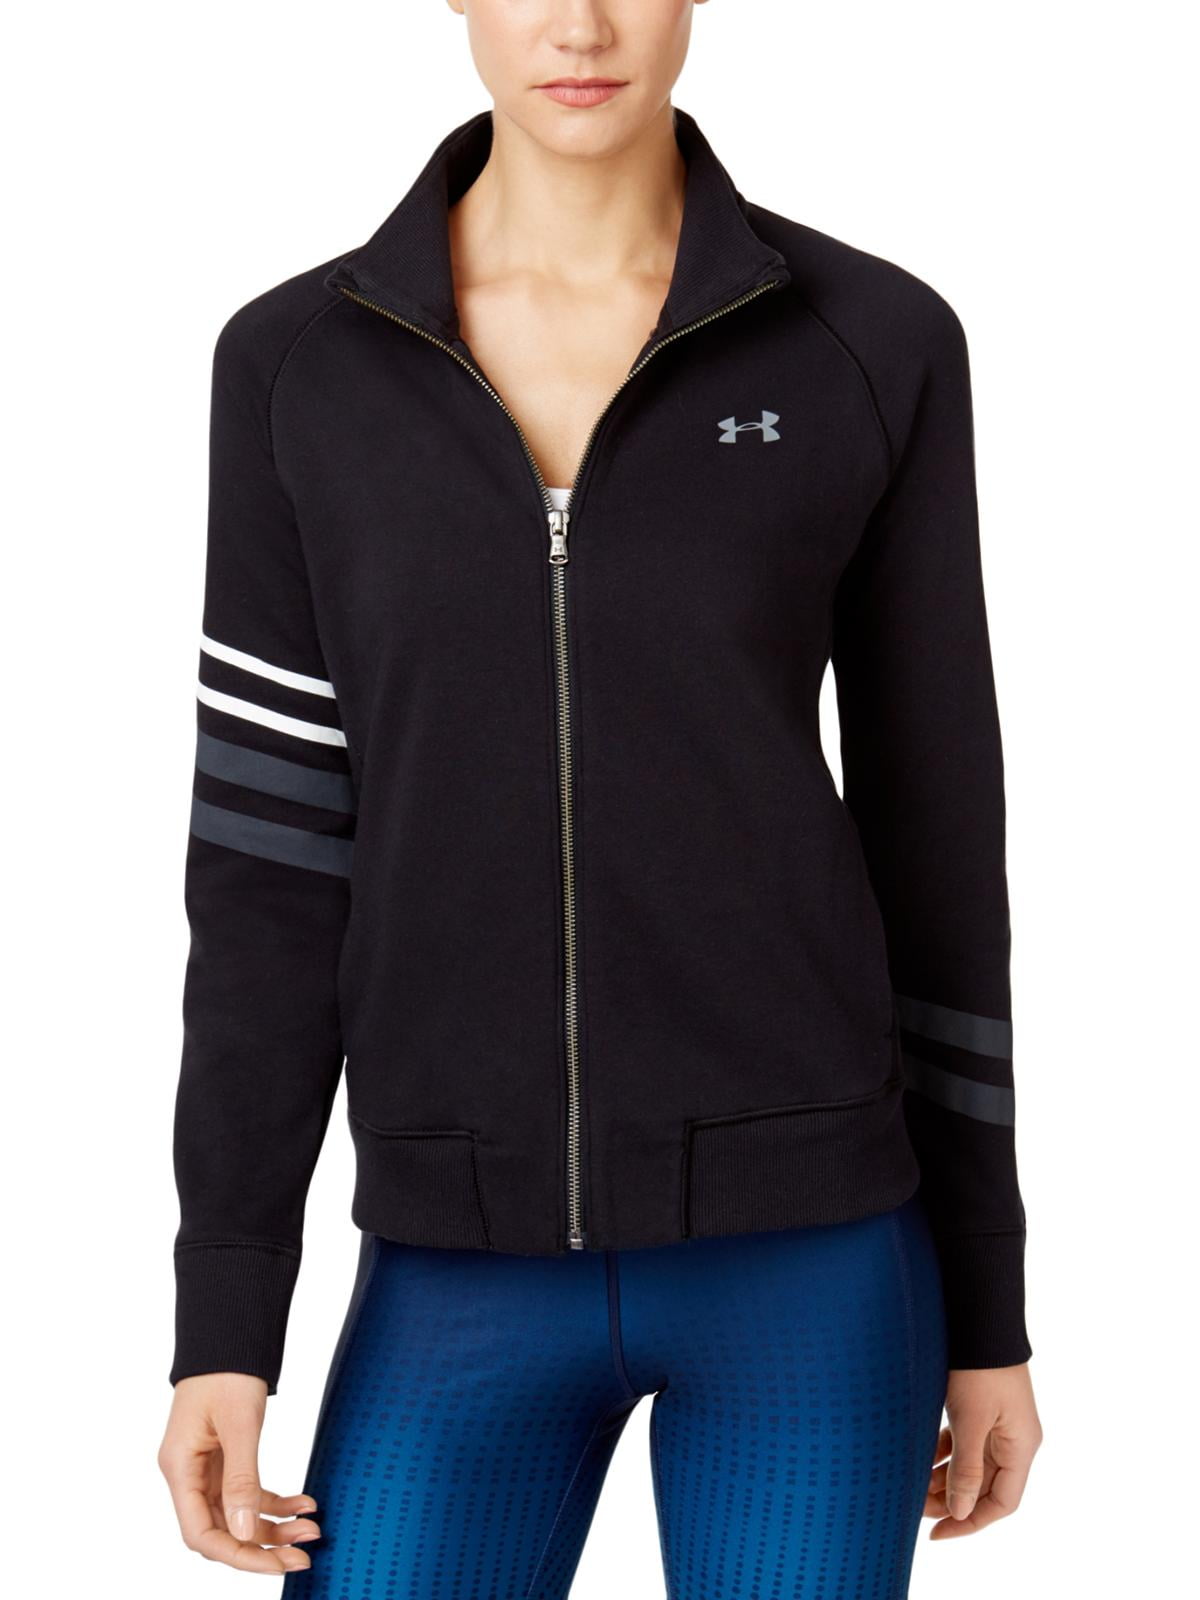 under armour pennant warm up jacket